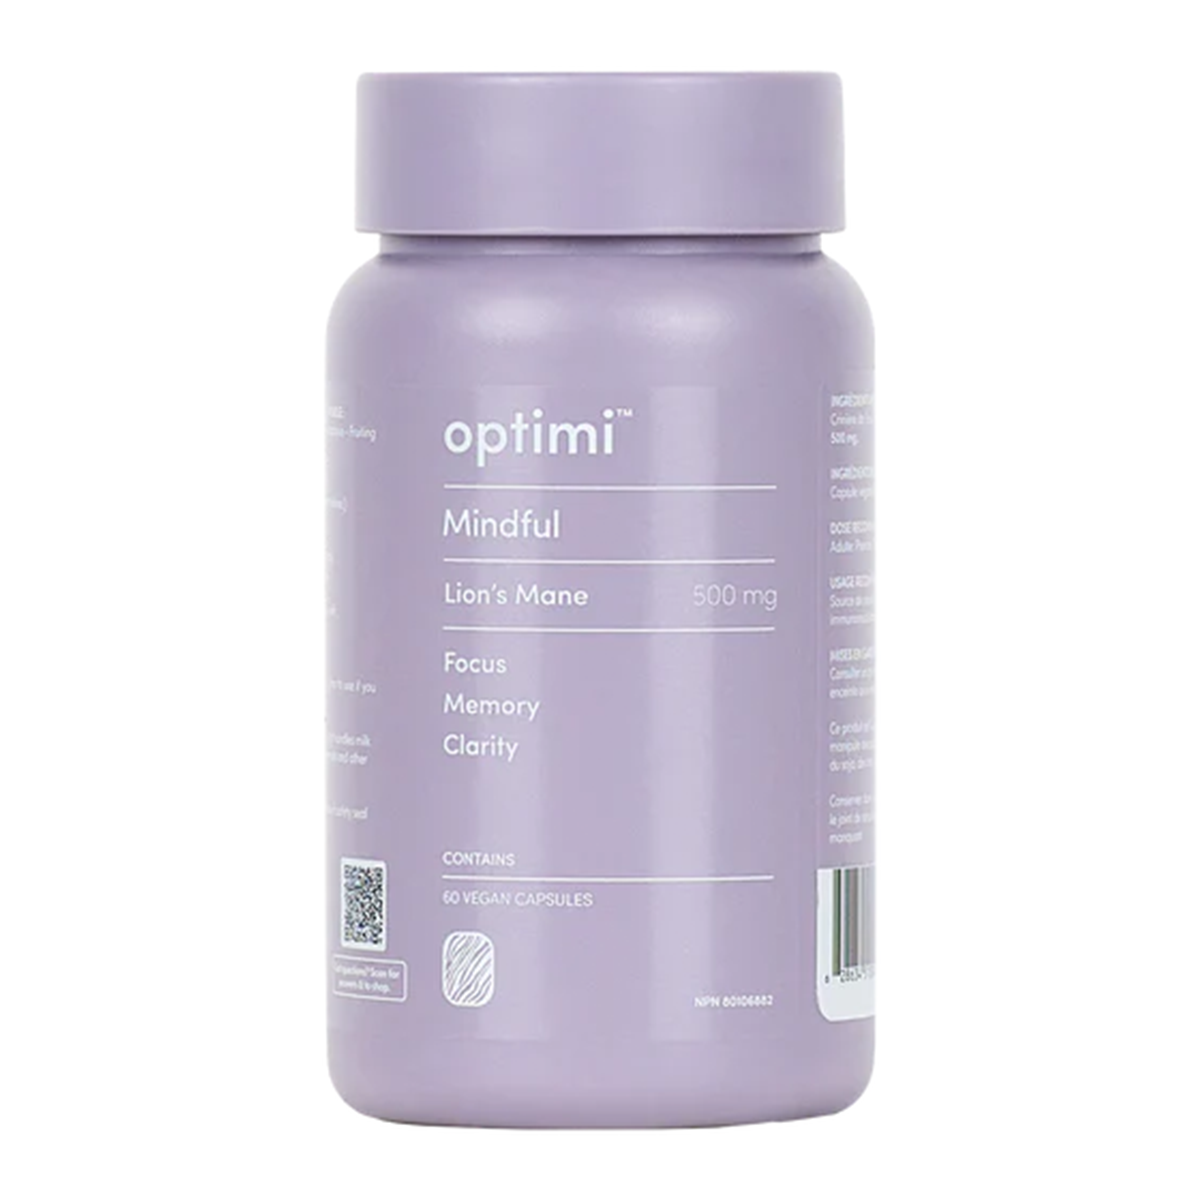 Optimi Mindful Lion's Mane medicinal mushroom supplement, 500 mg - for focus, memory and clarity. 